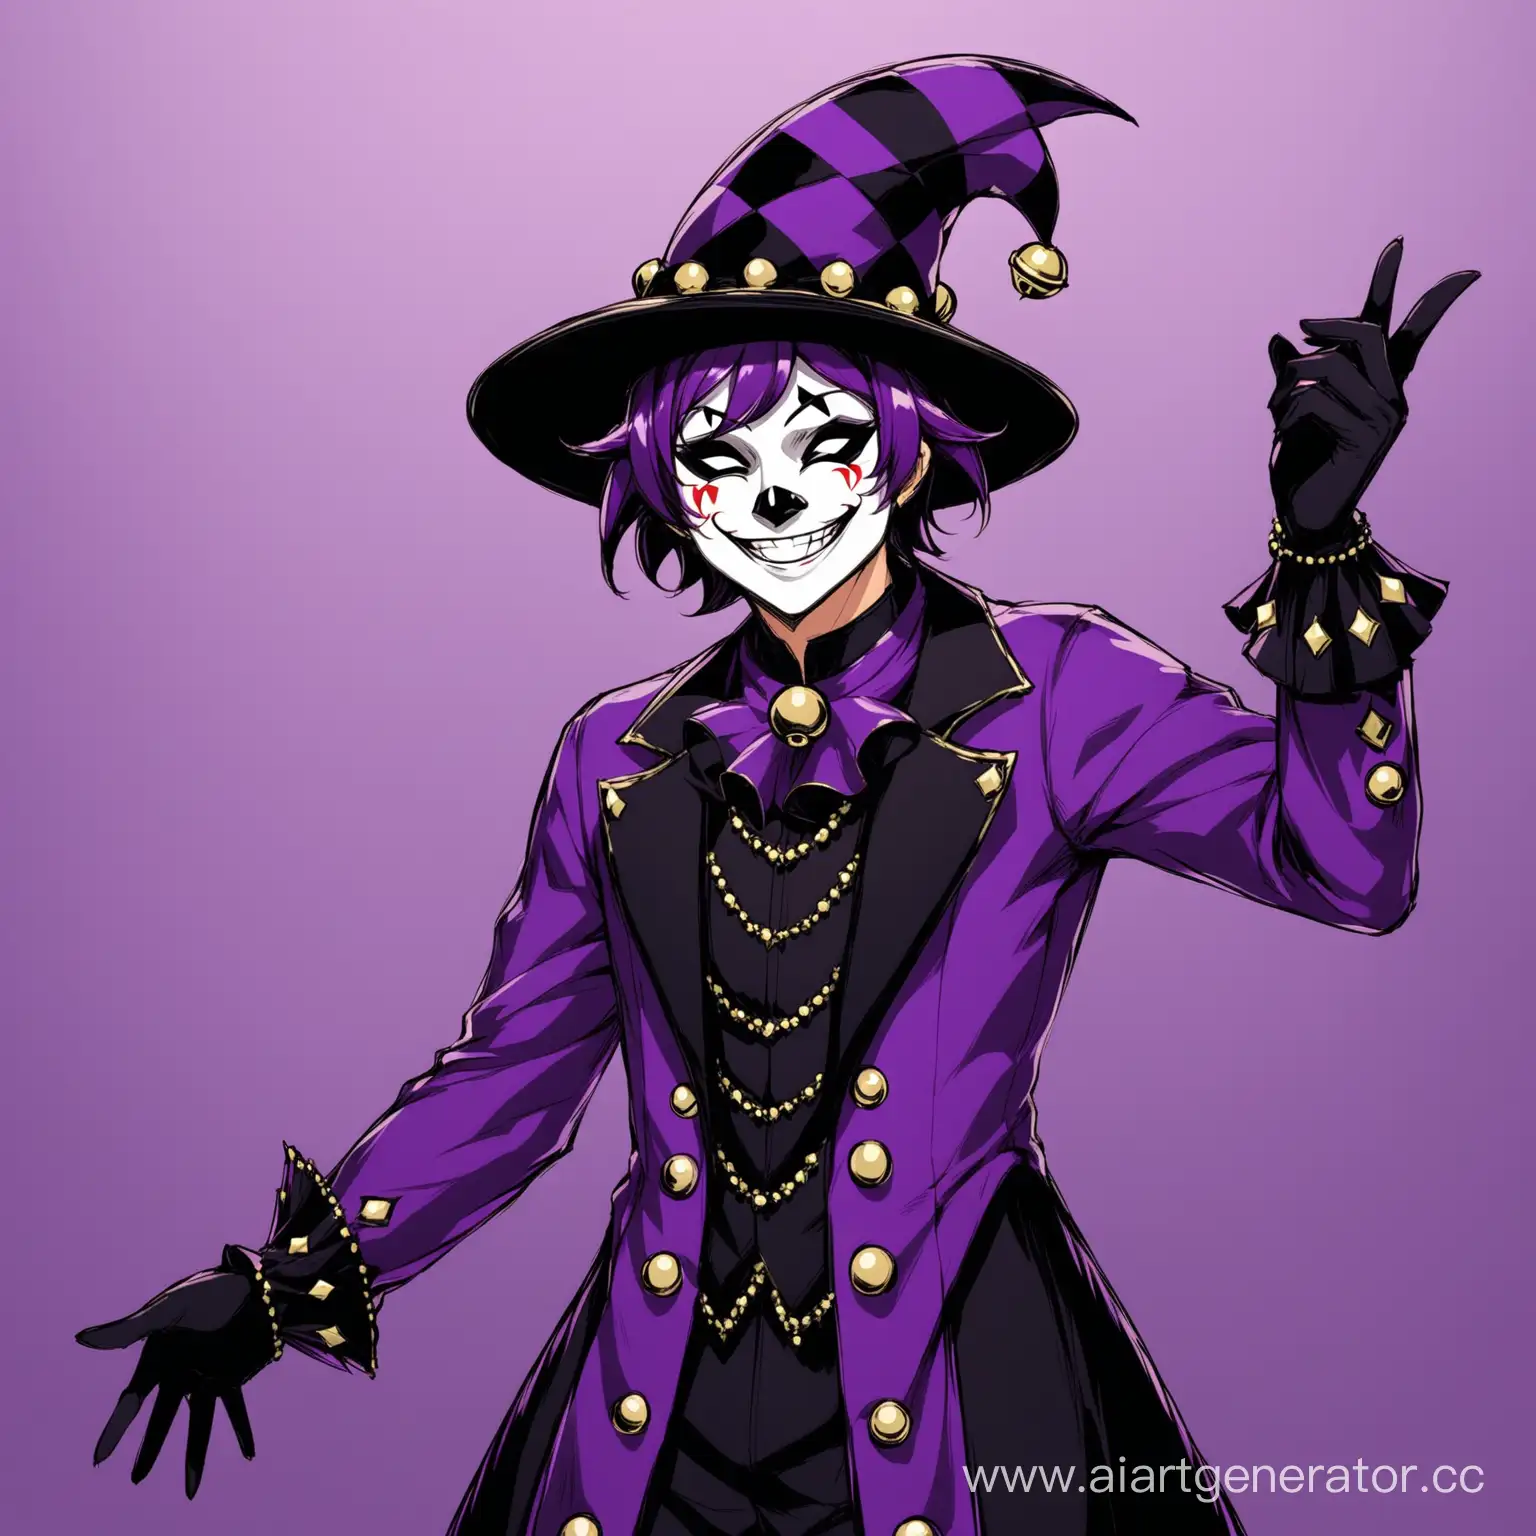 I’ll draw an anime jester whose costume is divided into black and dark purple, he wears a hat of the same color with two bells, and also wears a mask with a wide smile